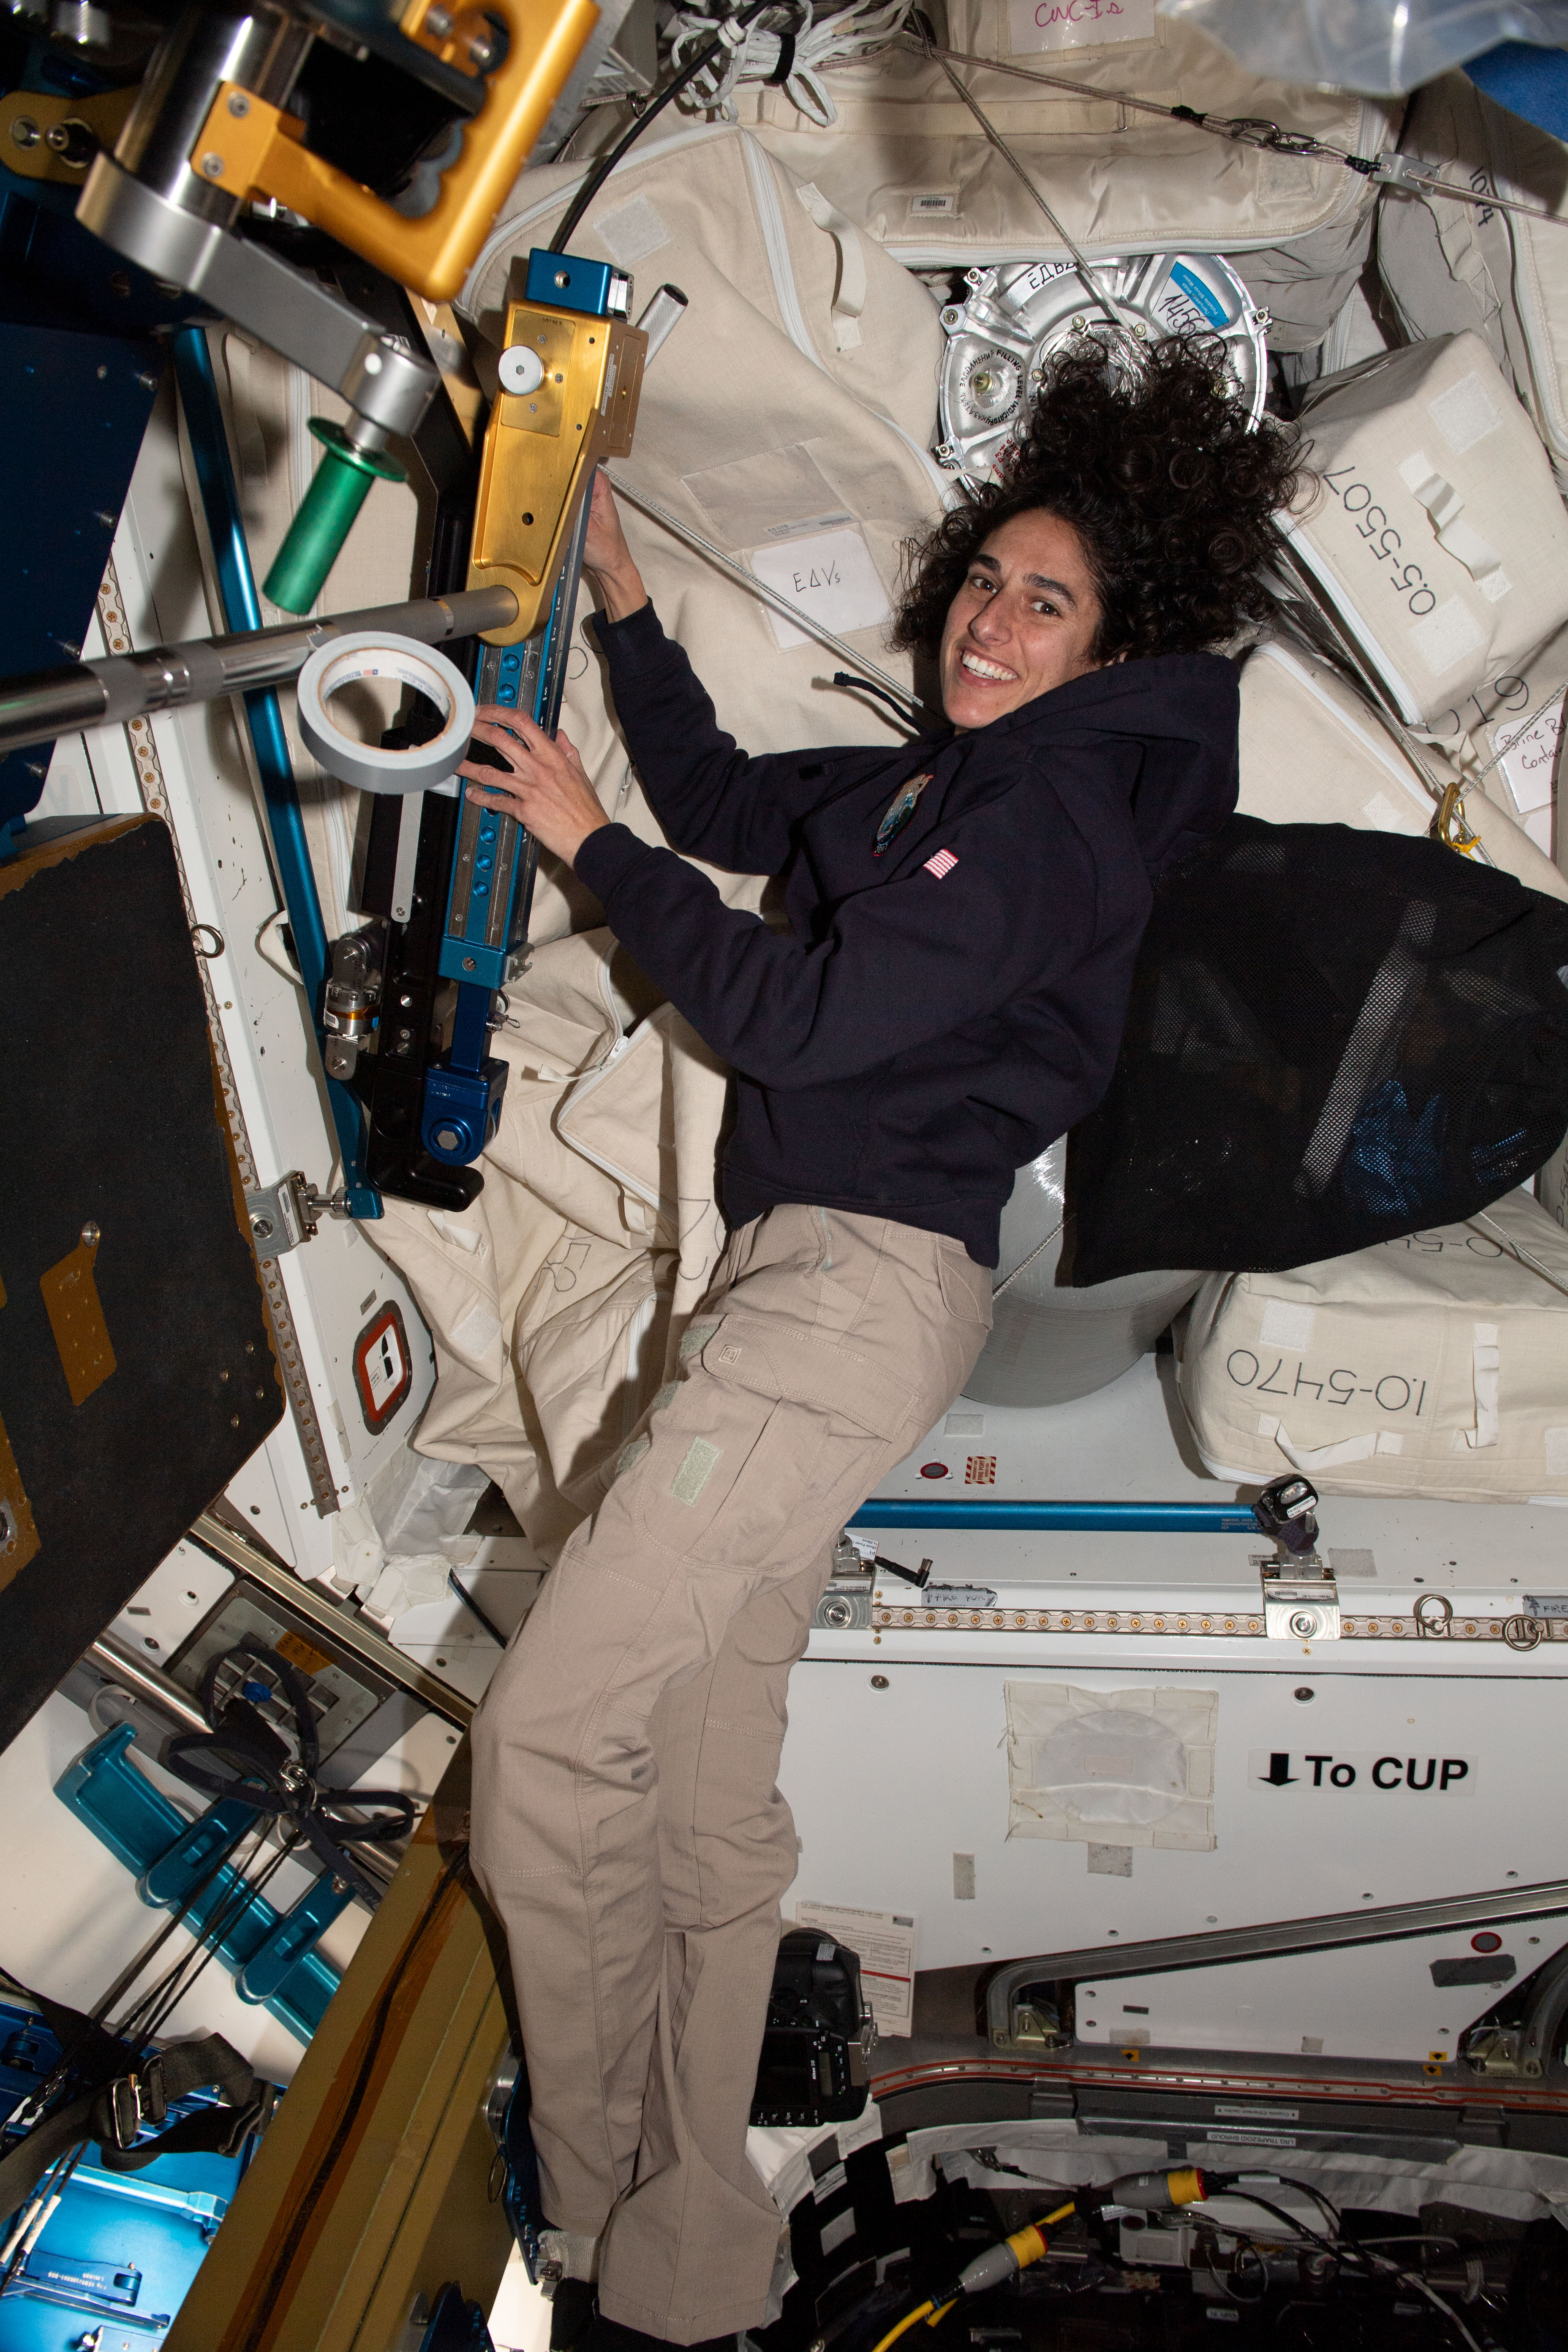 NASA astronaut and Expedition 70 Flight Engineer Jasmin Moghbeli replaces cables on the advanced resistive exercise device inside the International Space Station's Tranquility module.